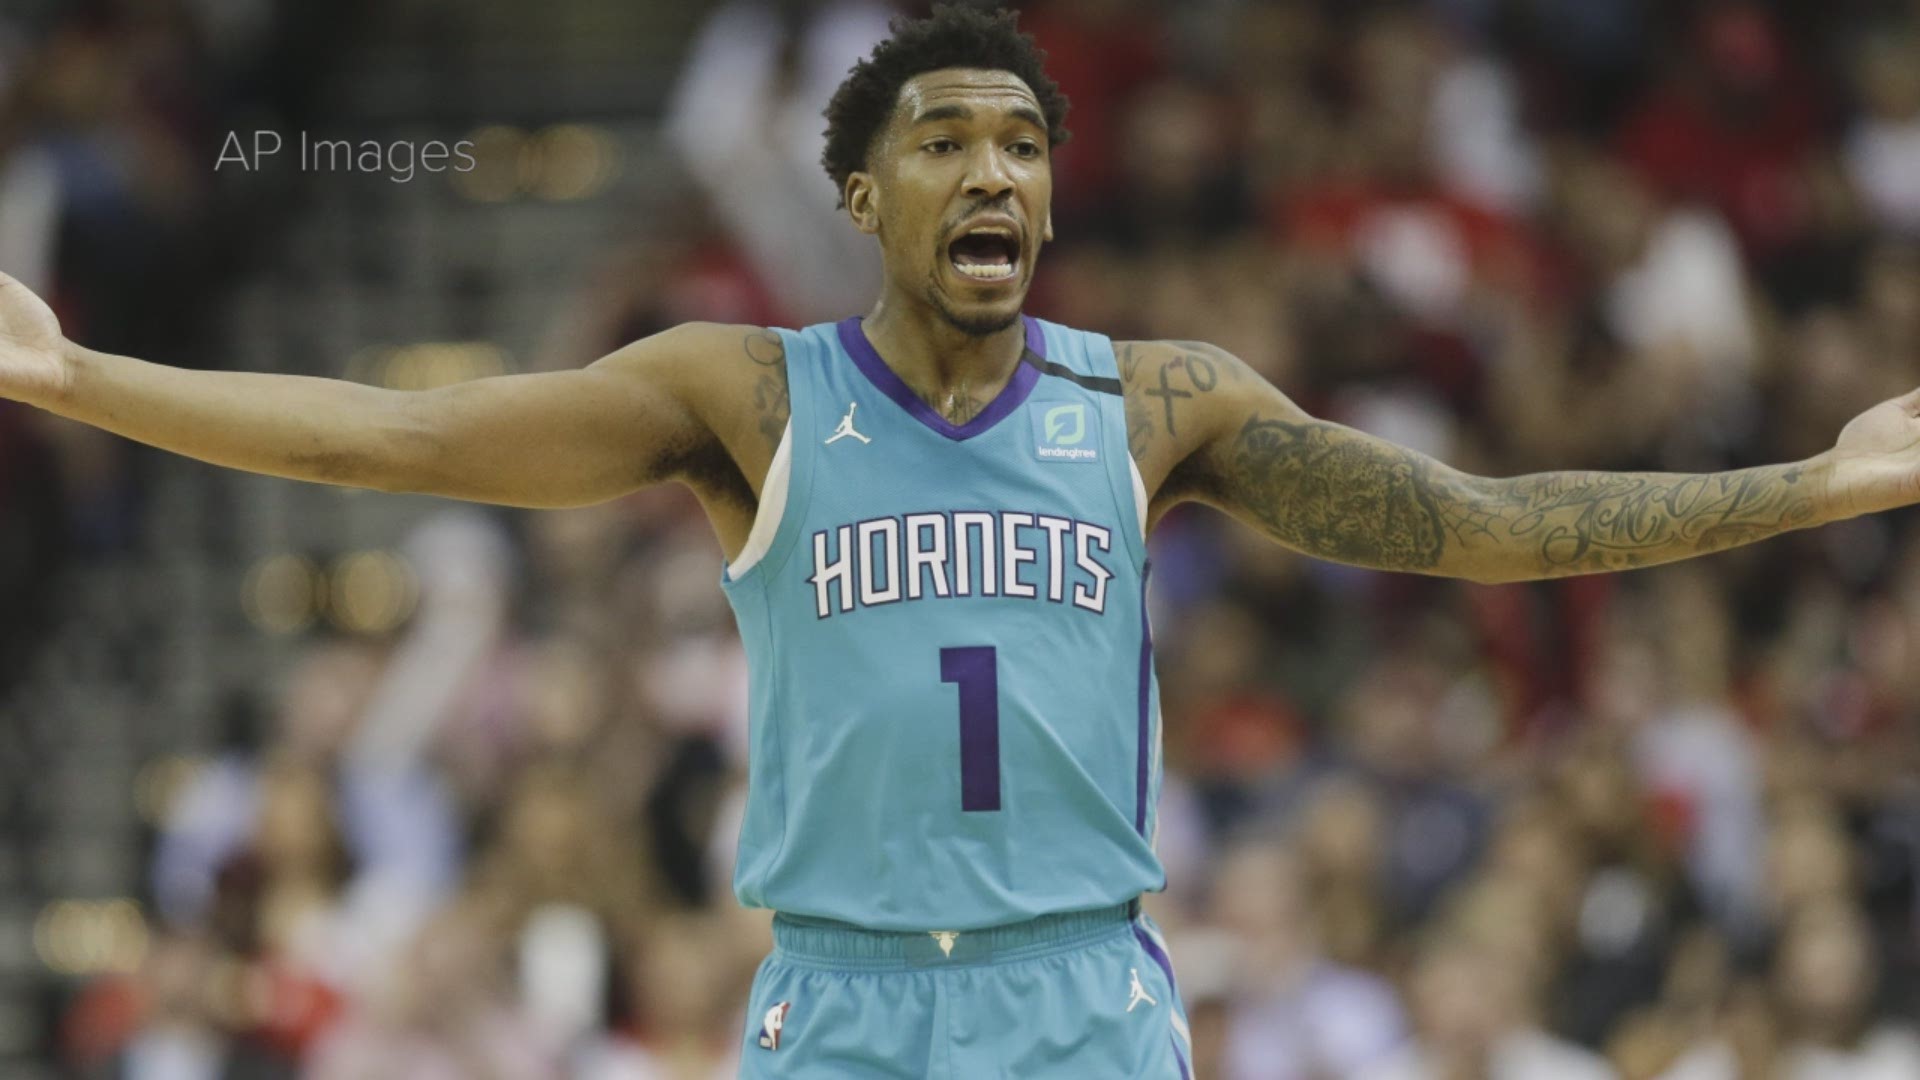 Hornets guard Malik Monk is facing an indefinite suspension for violating the NBA's anti-drug policy.